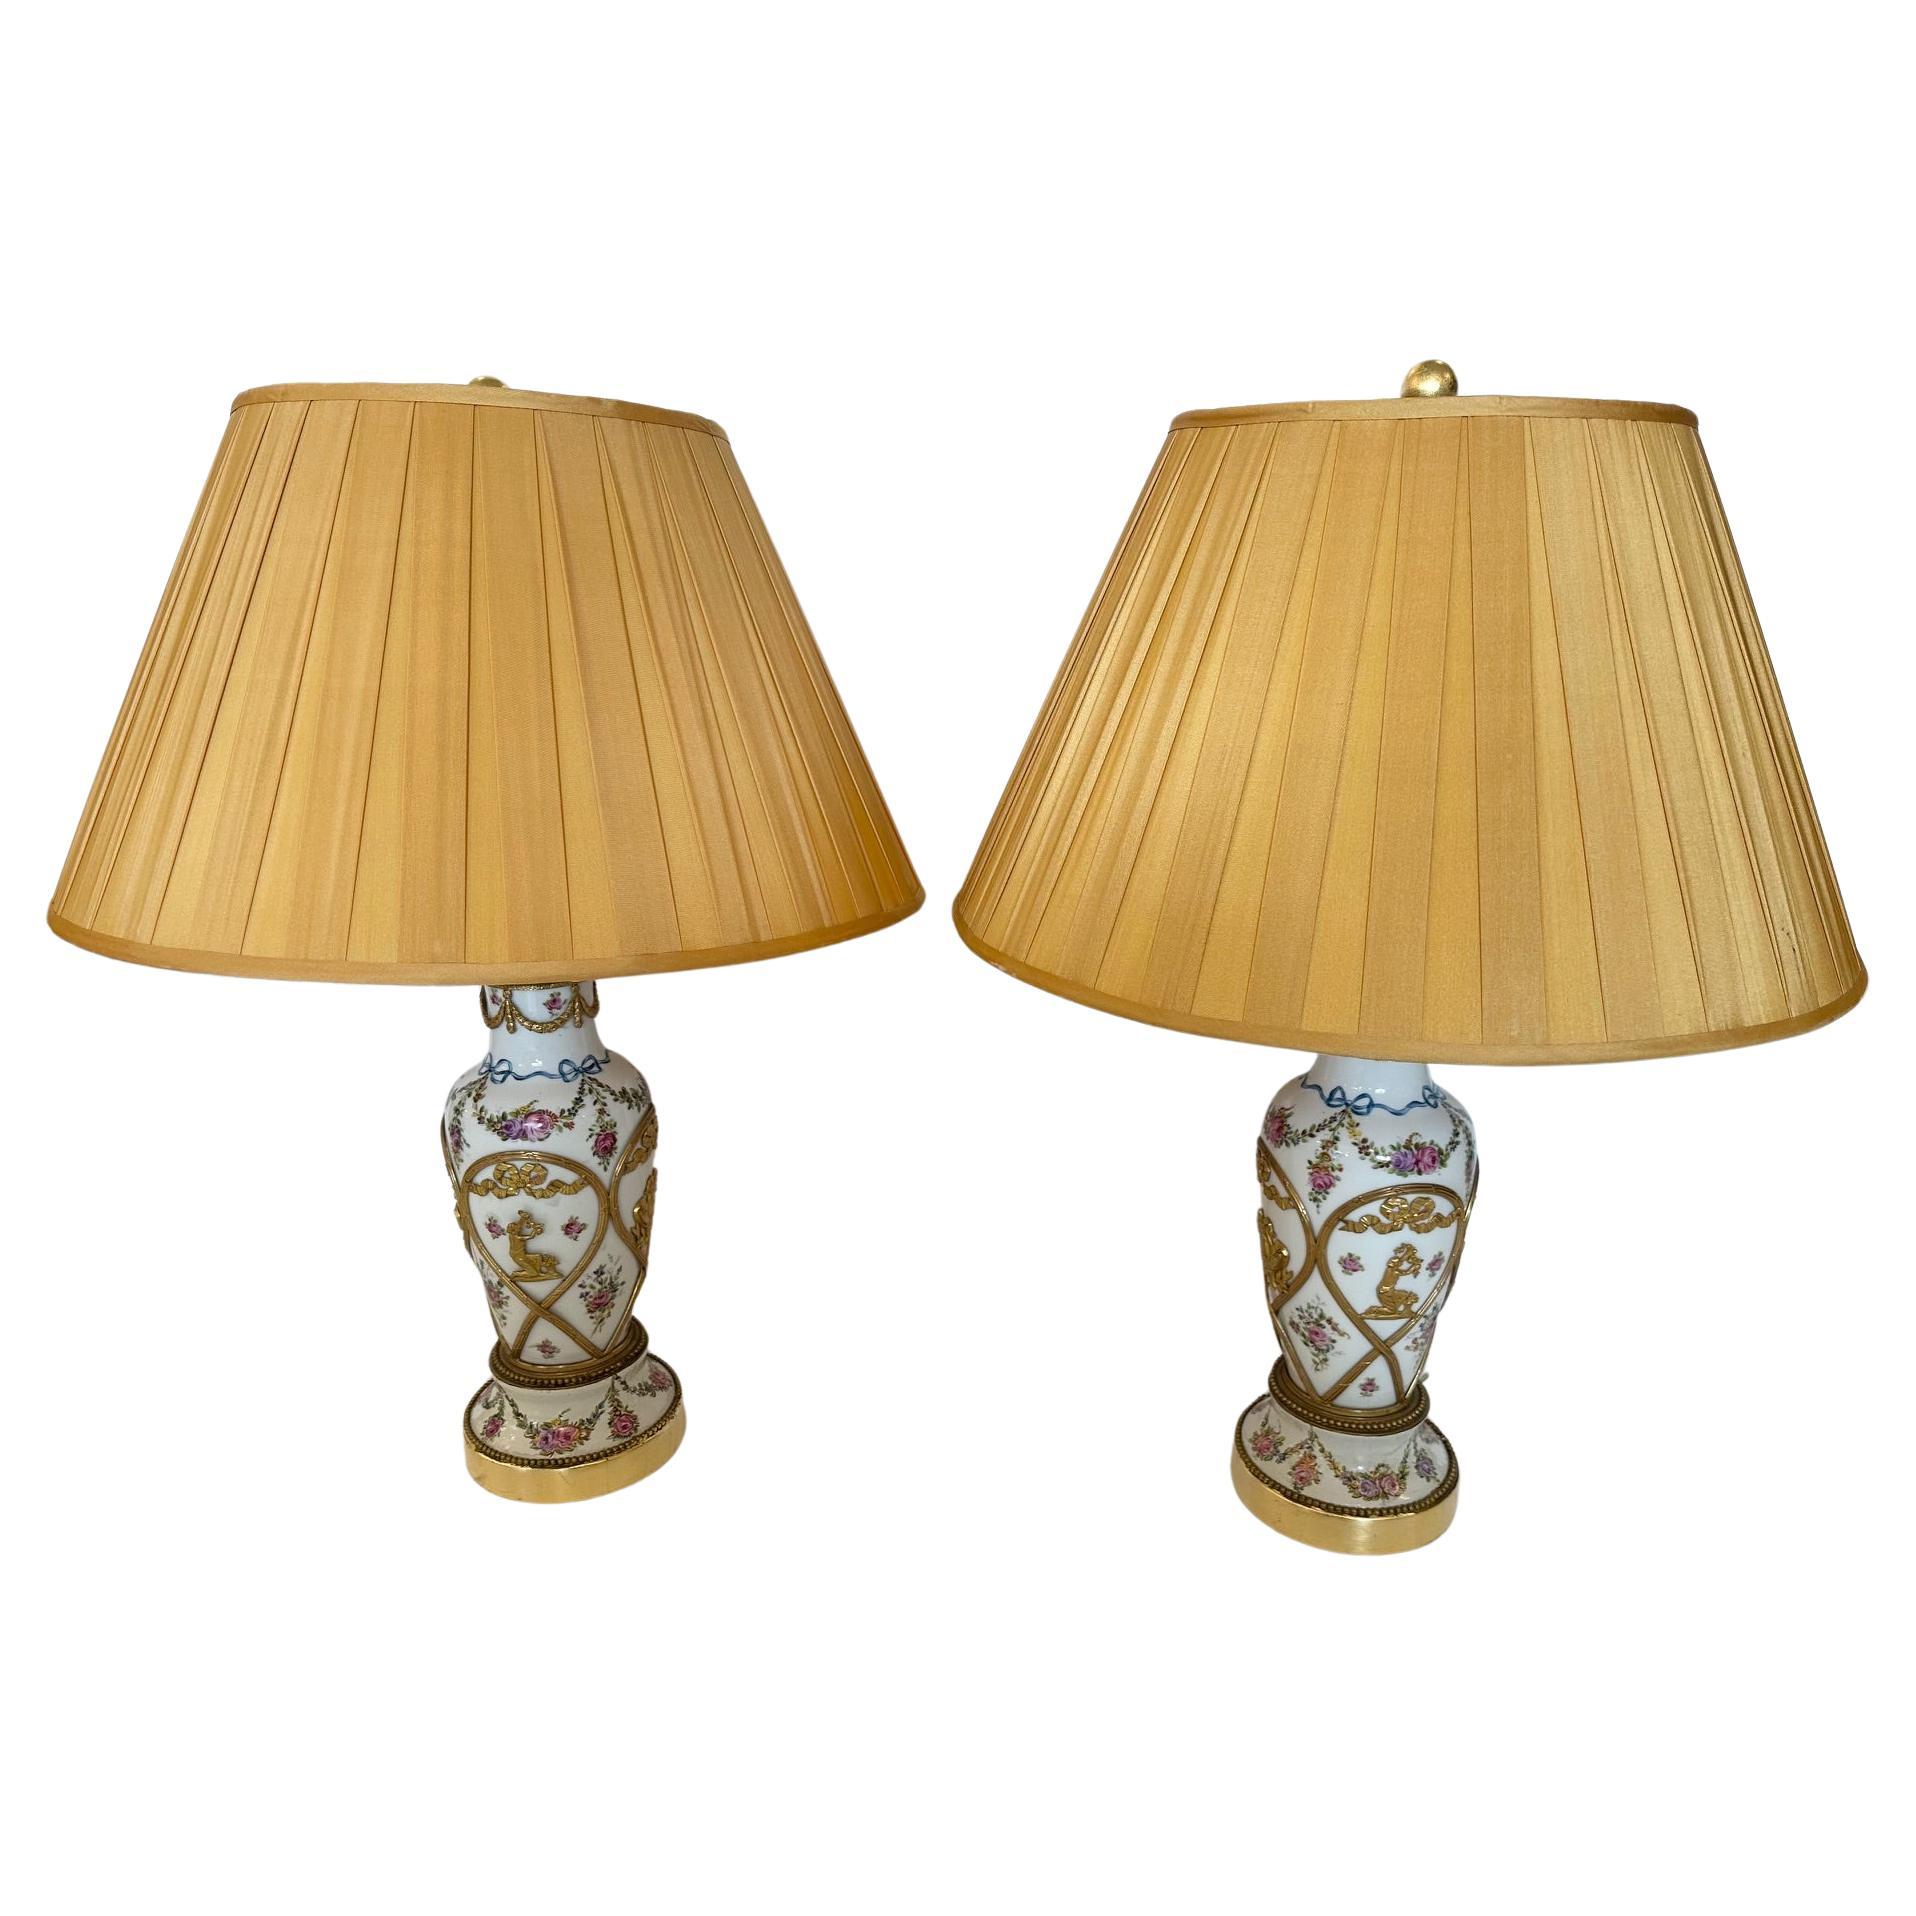 Gorgeous Pair of Vintage Porcelain Painted Table Lamps with Brass Overlays